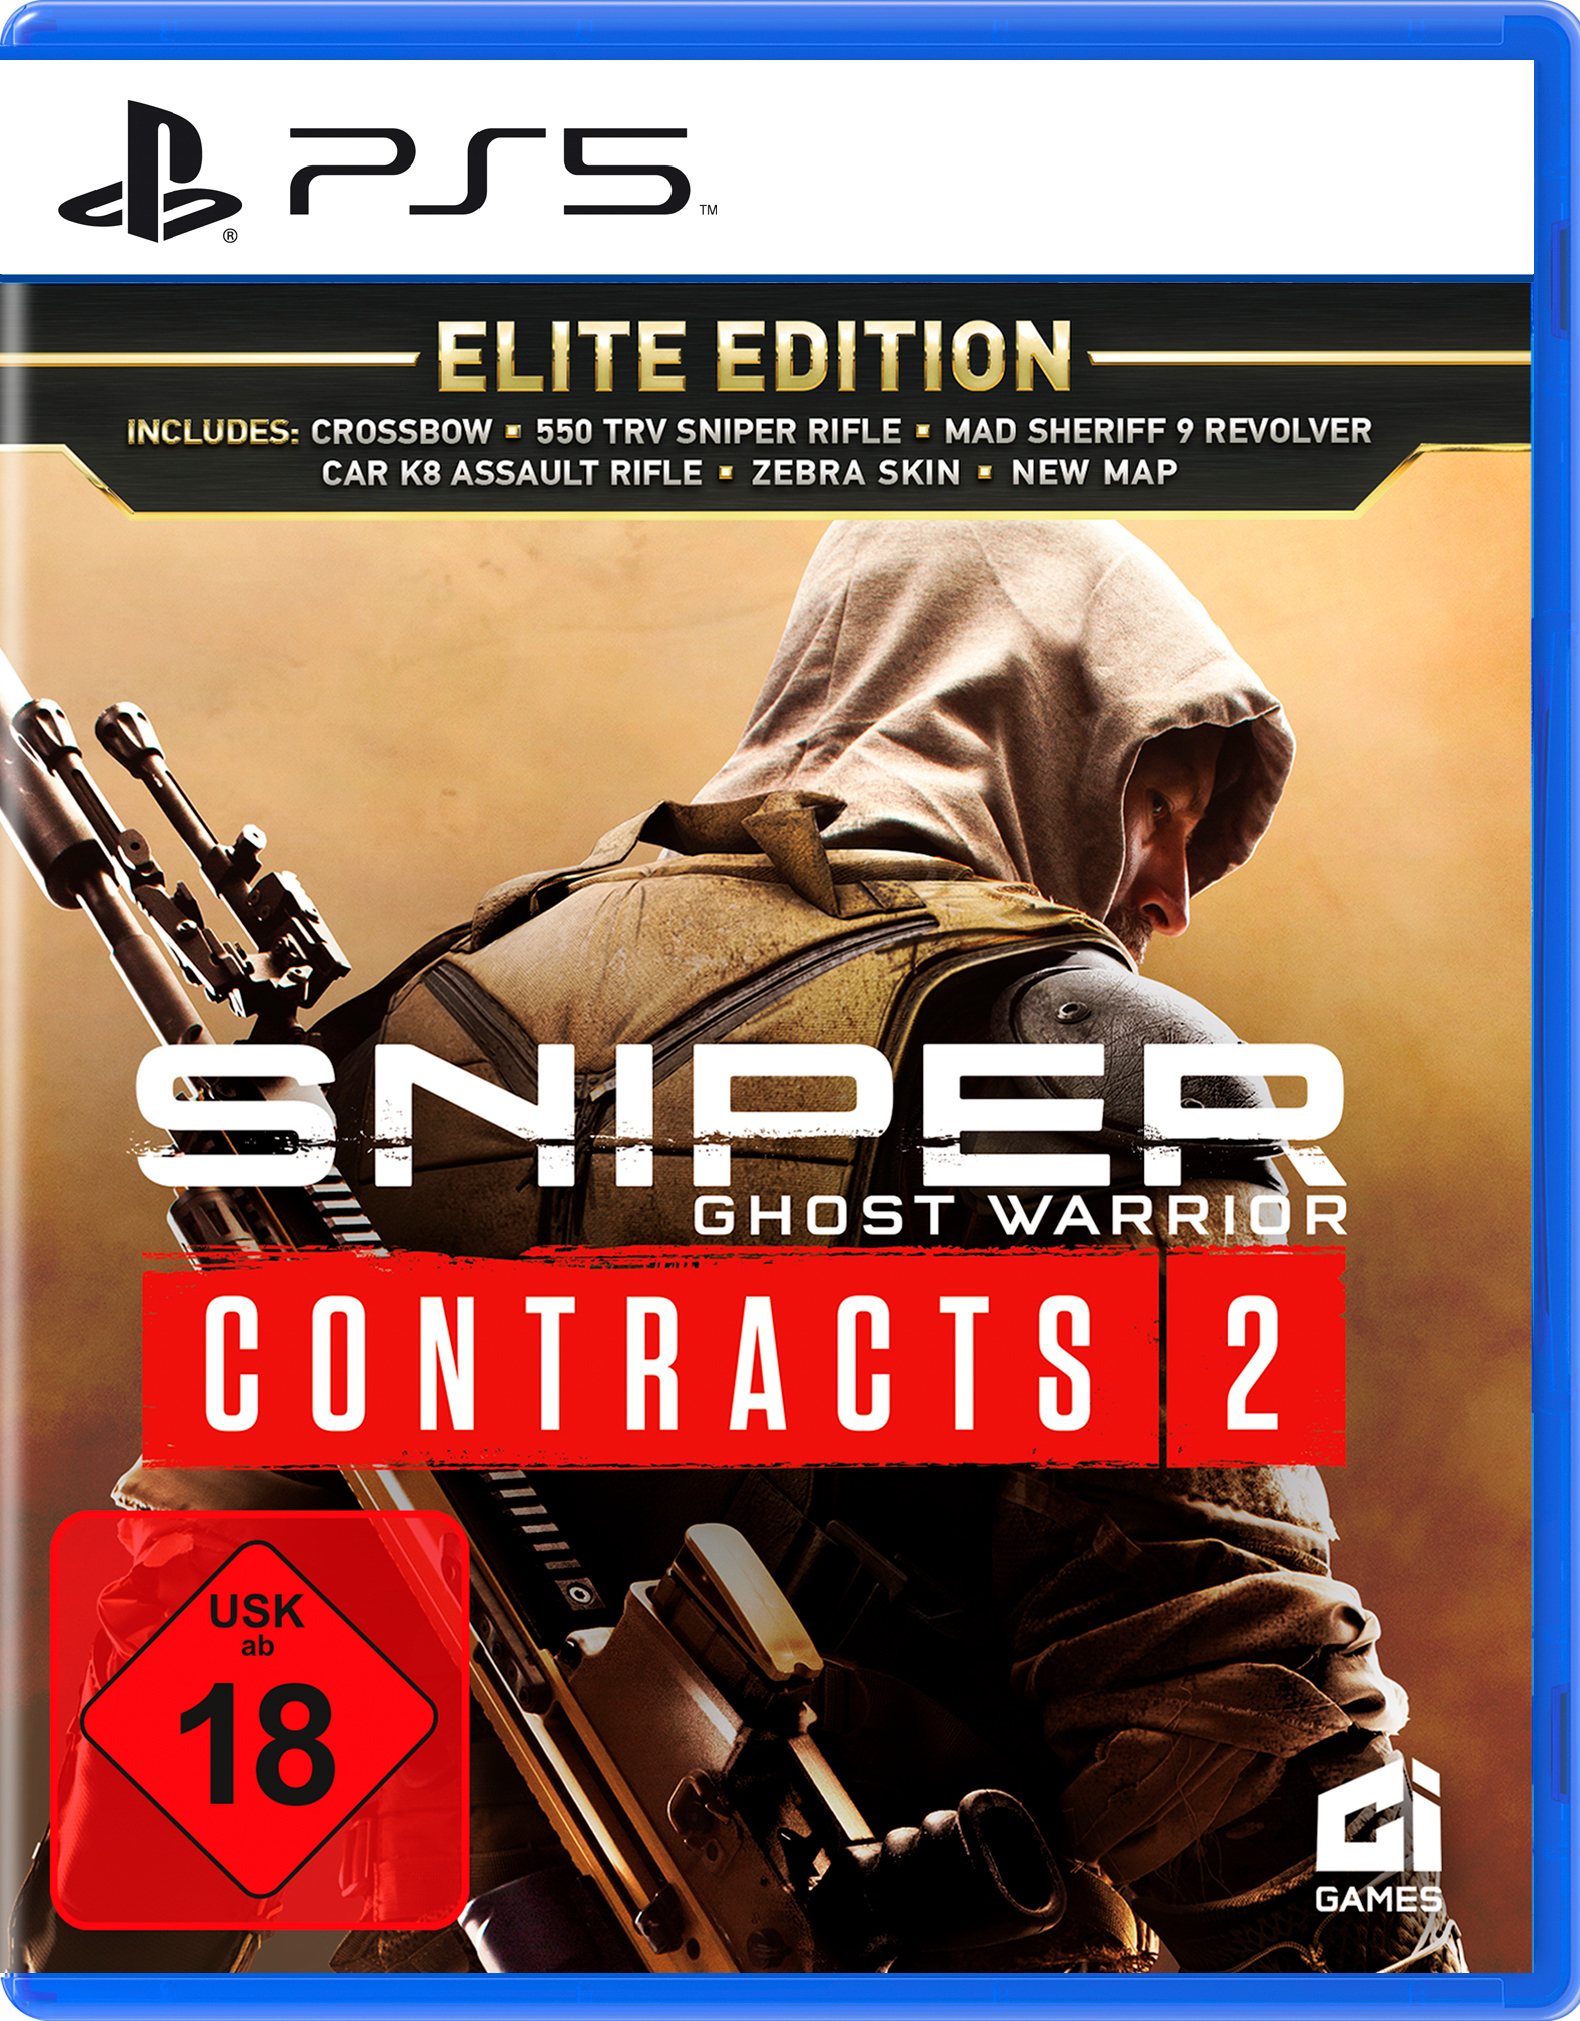 Sniper Ghost Warrior Contracts 2 - Elite Edition